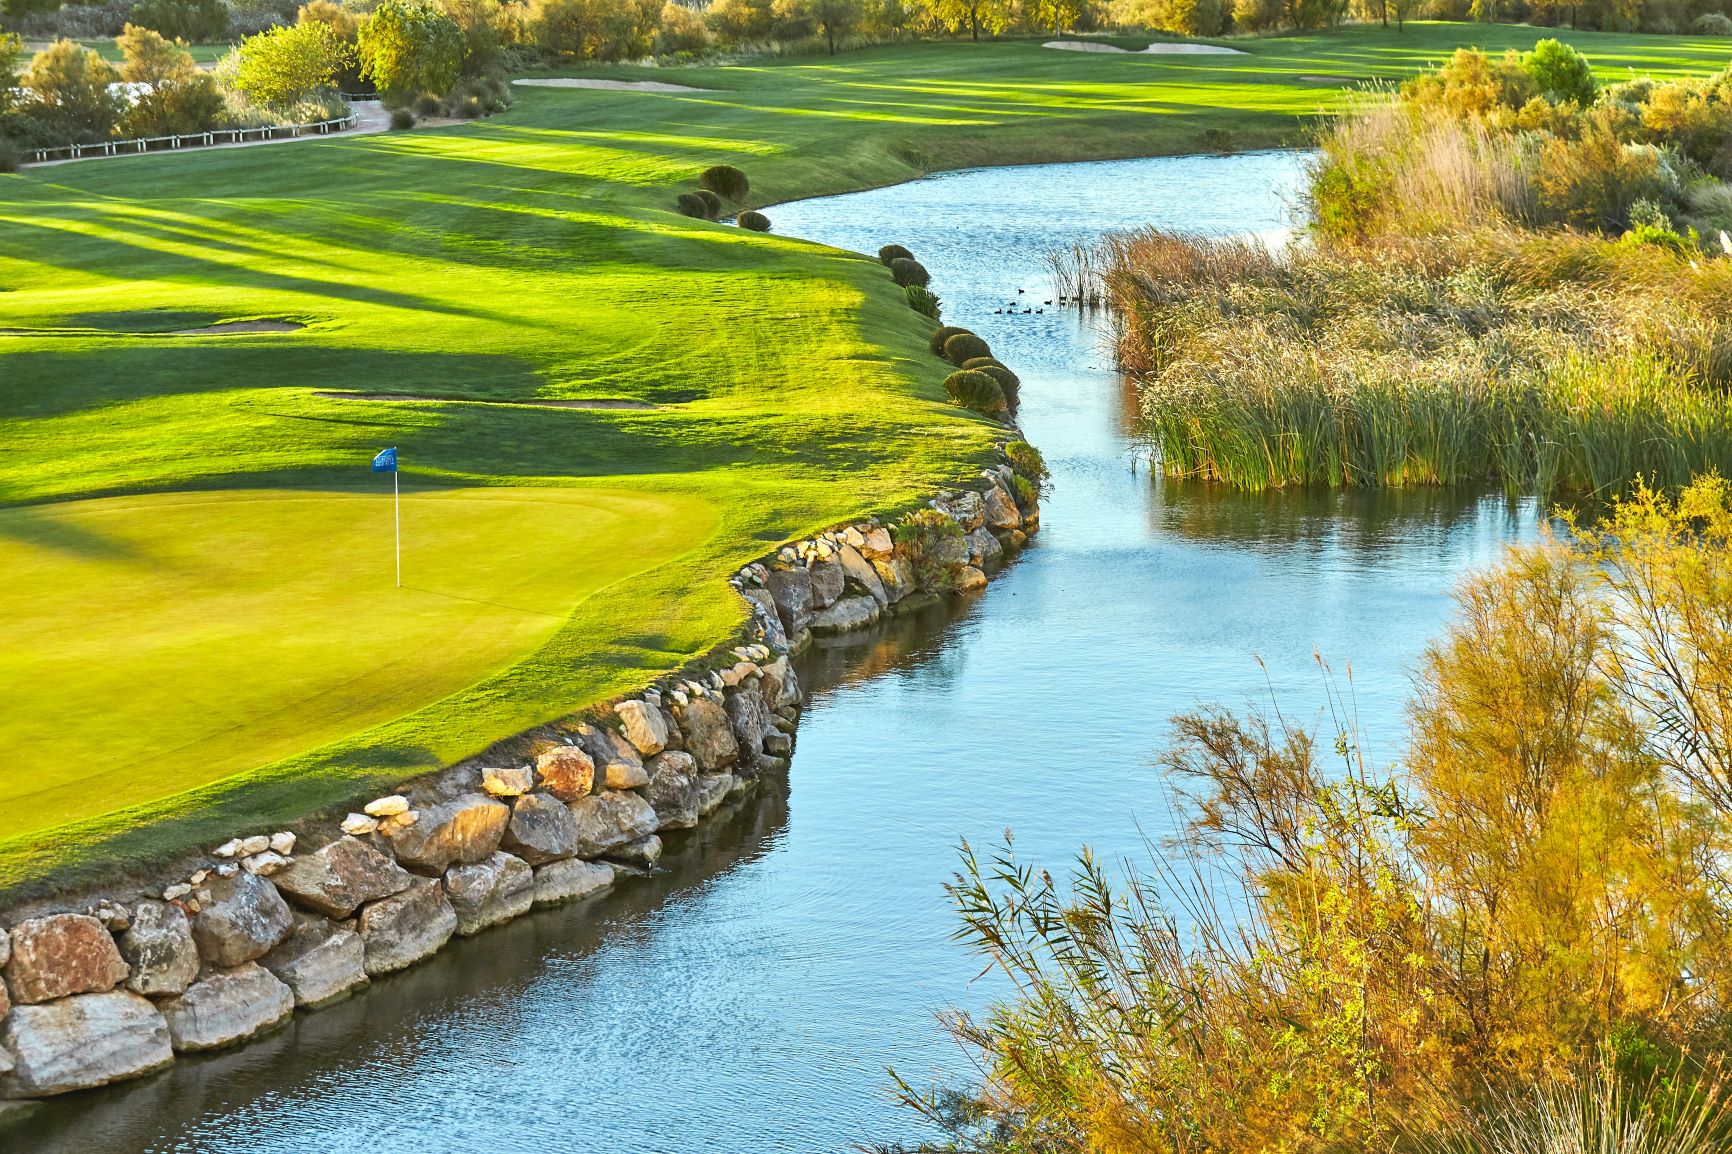 The-Lakes-is-one-of-two-course-designed-by-World-Golf-Hall-of-Famer-Greg-Norman-at-Lumine-Golf-Club